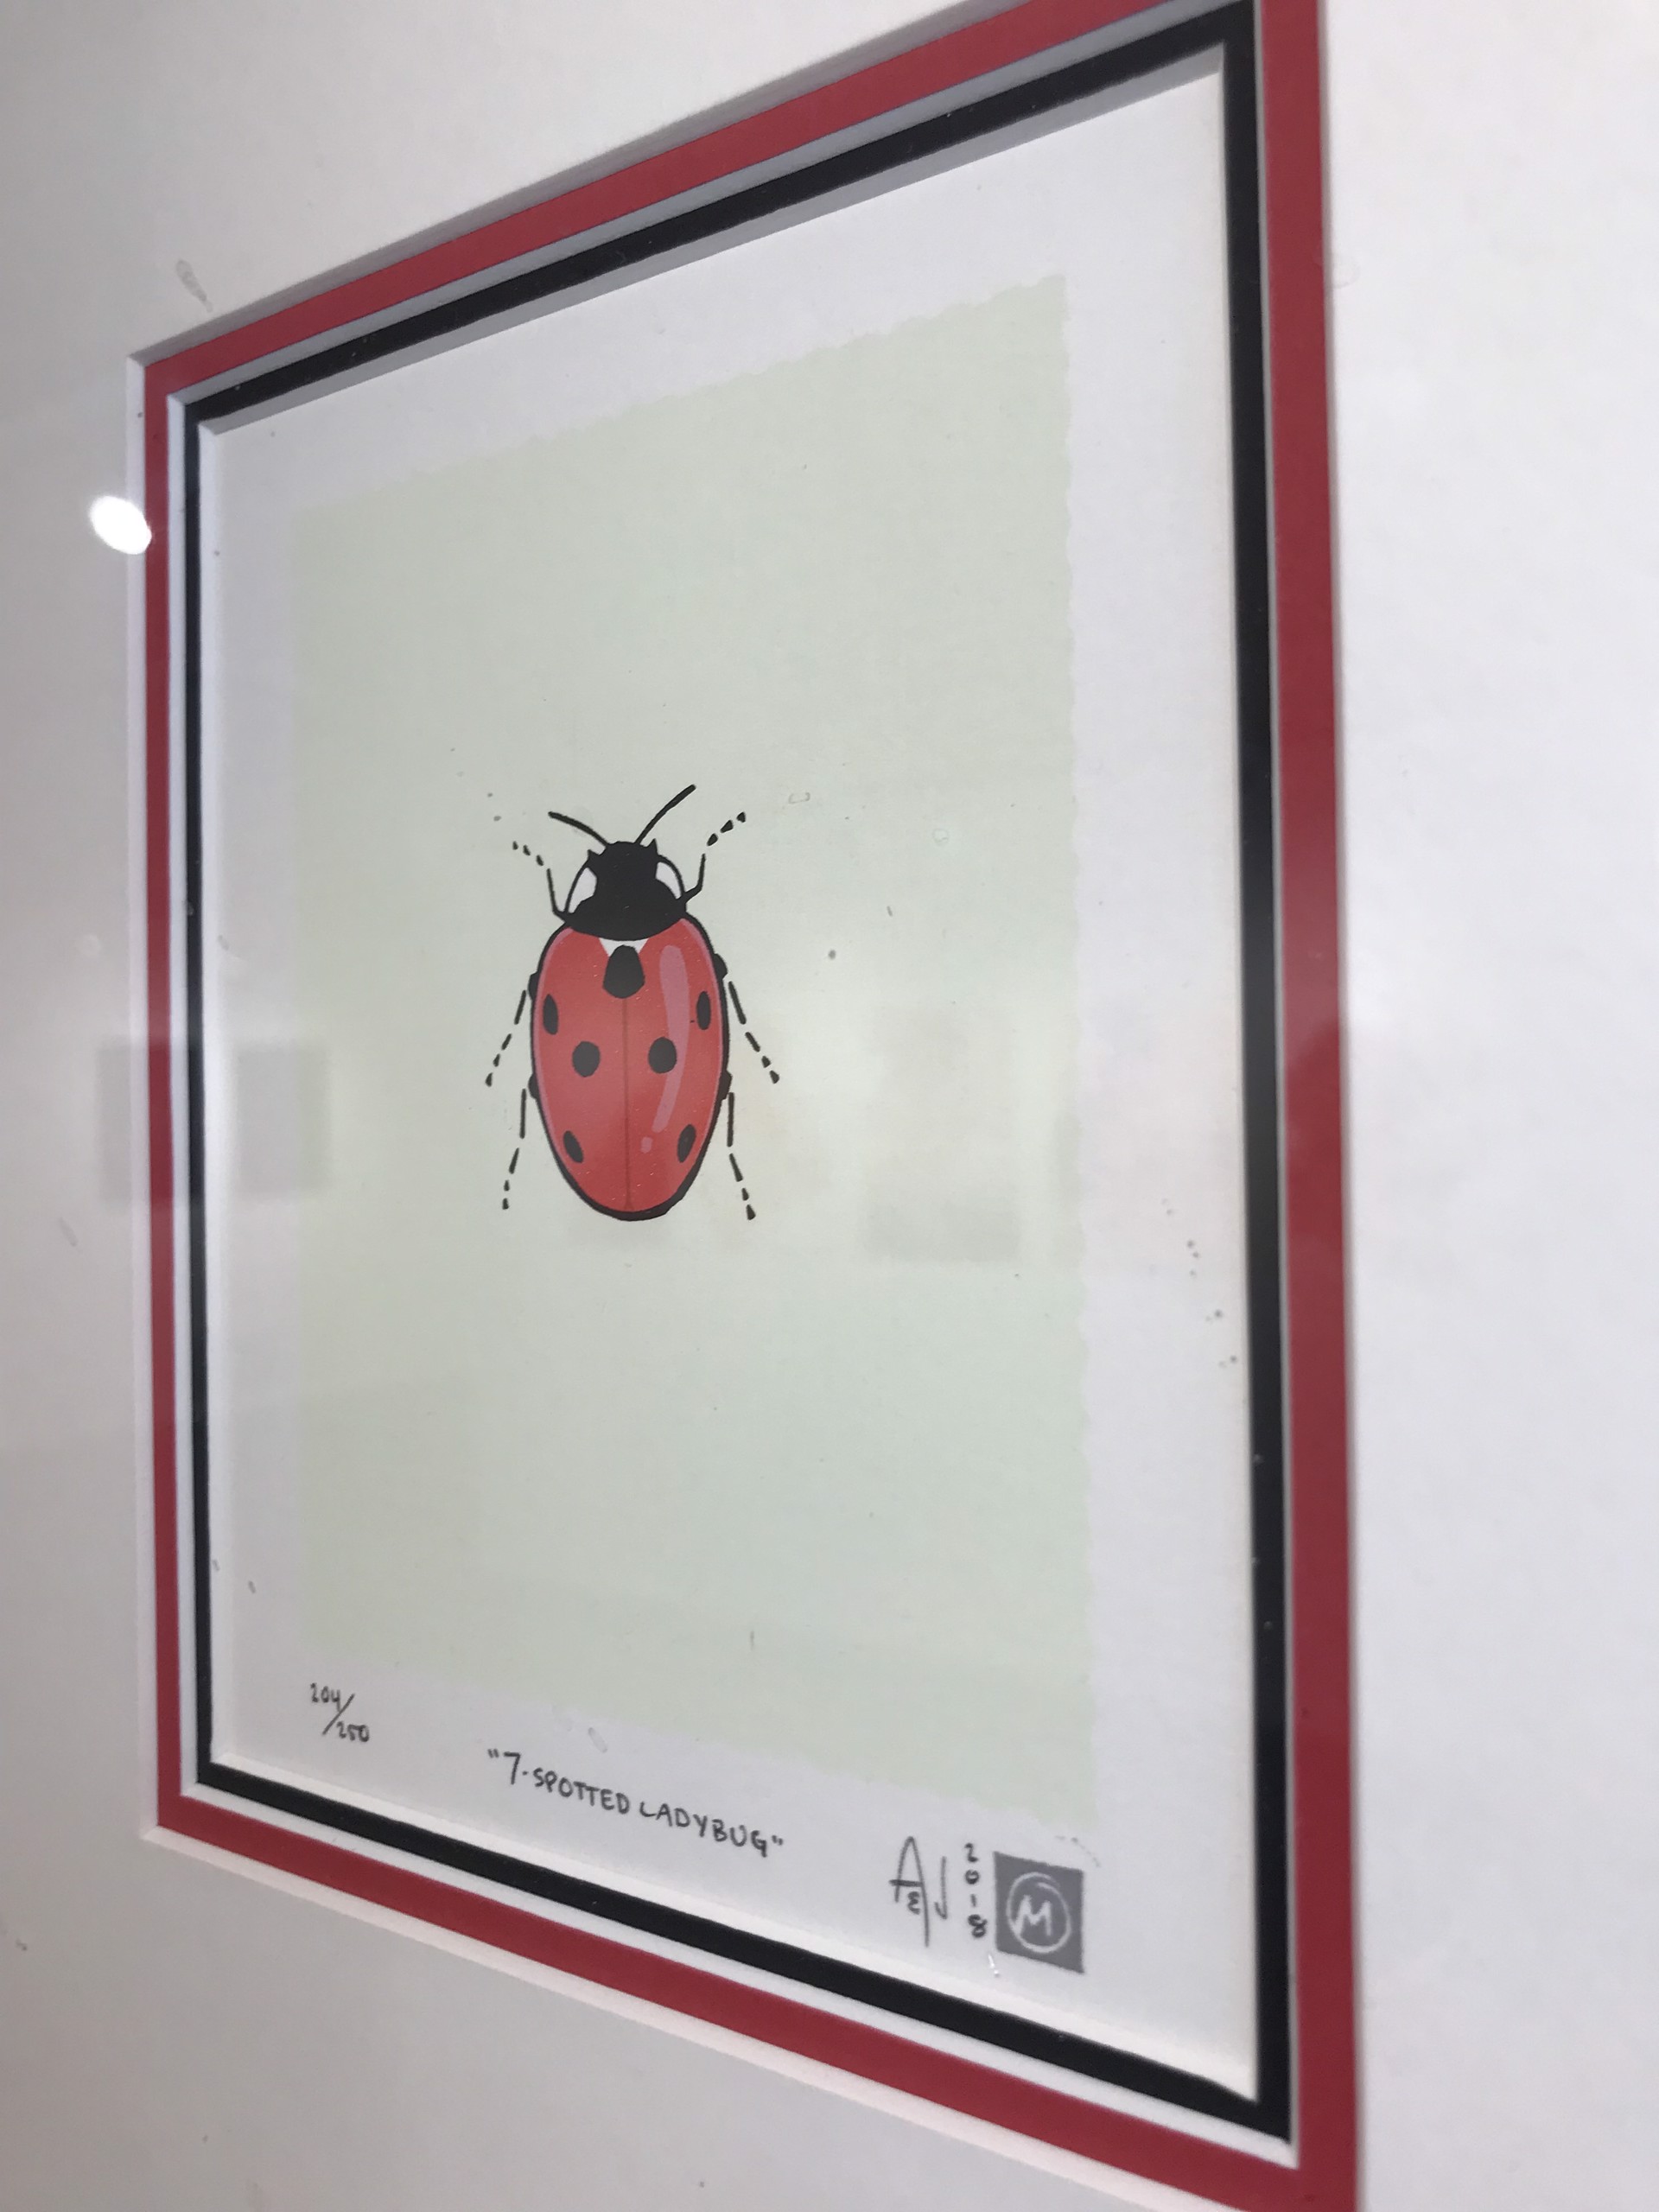 7 Spotted Lady Bug by Allison & Jonathan Metzger